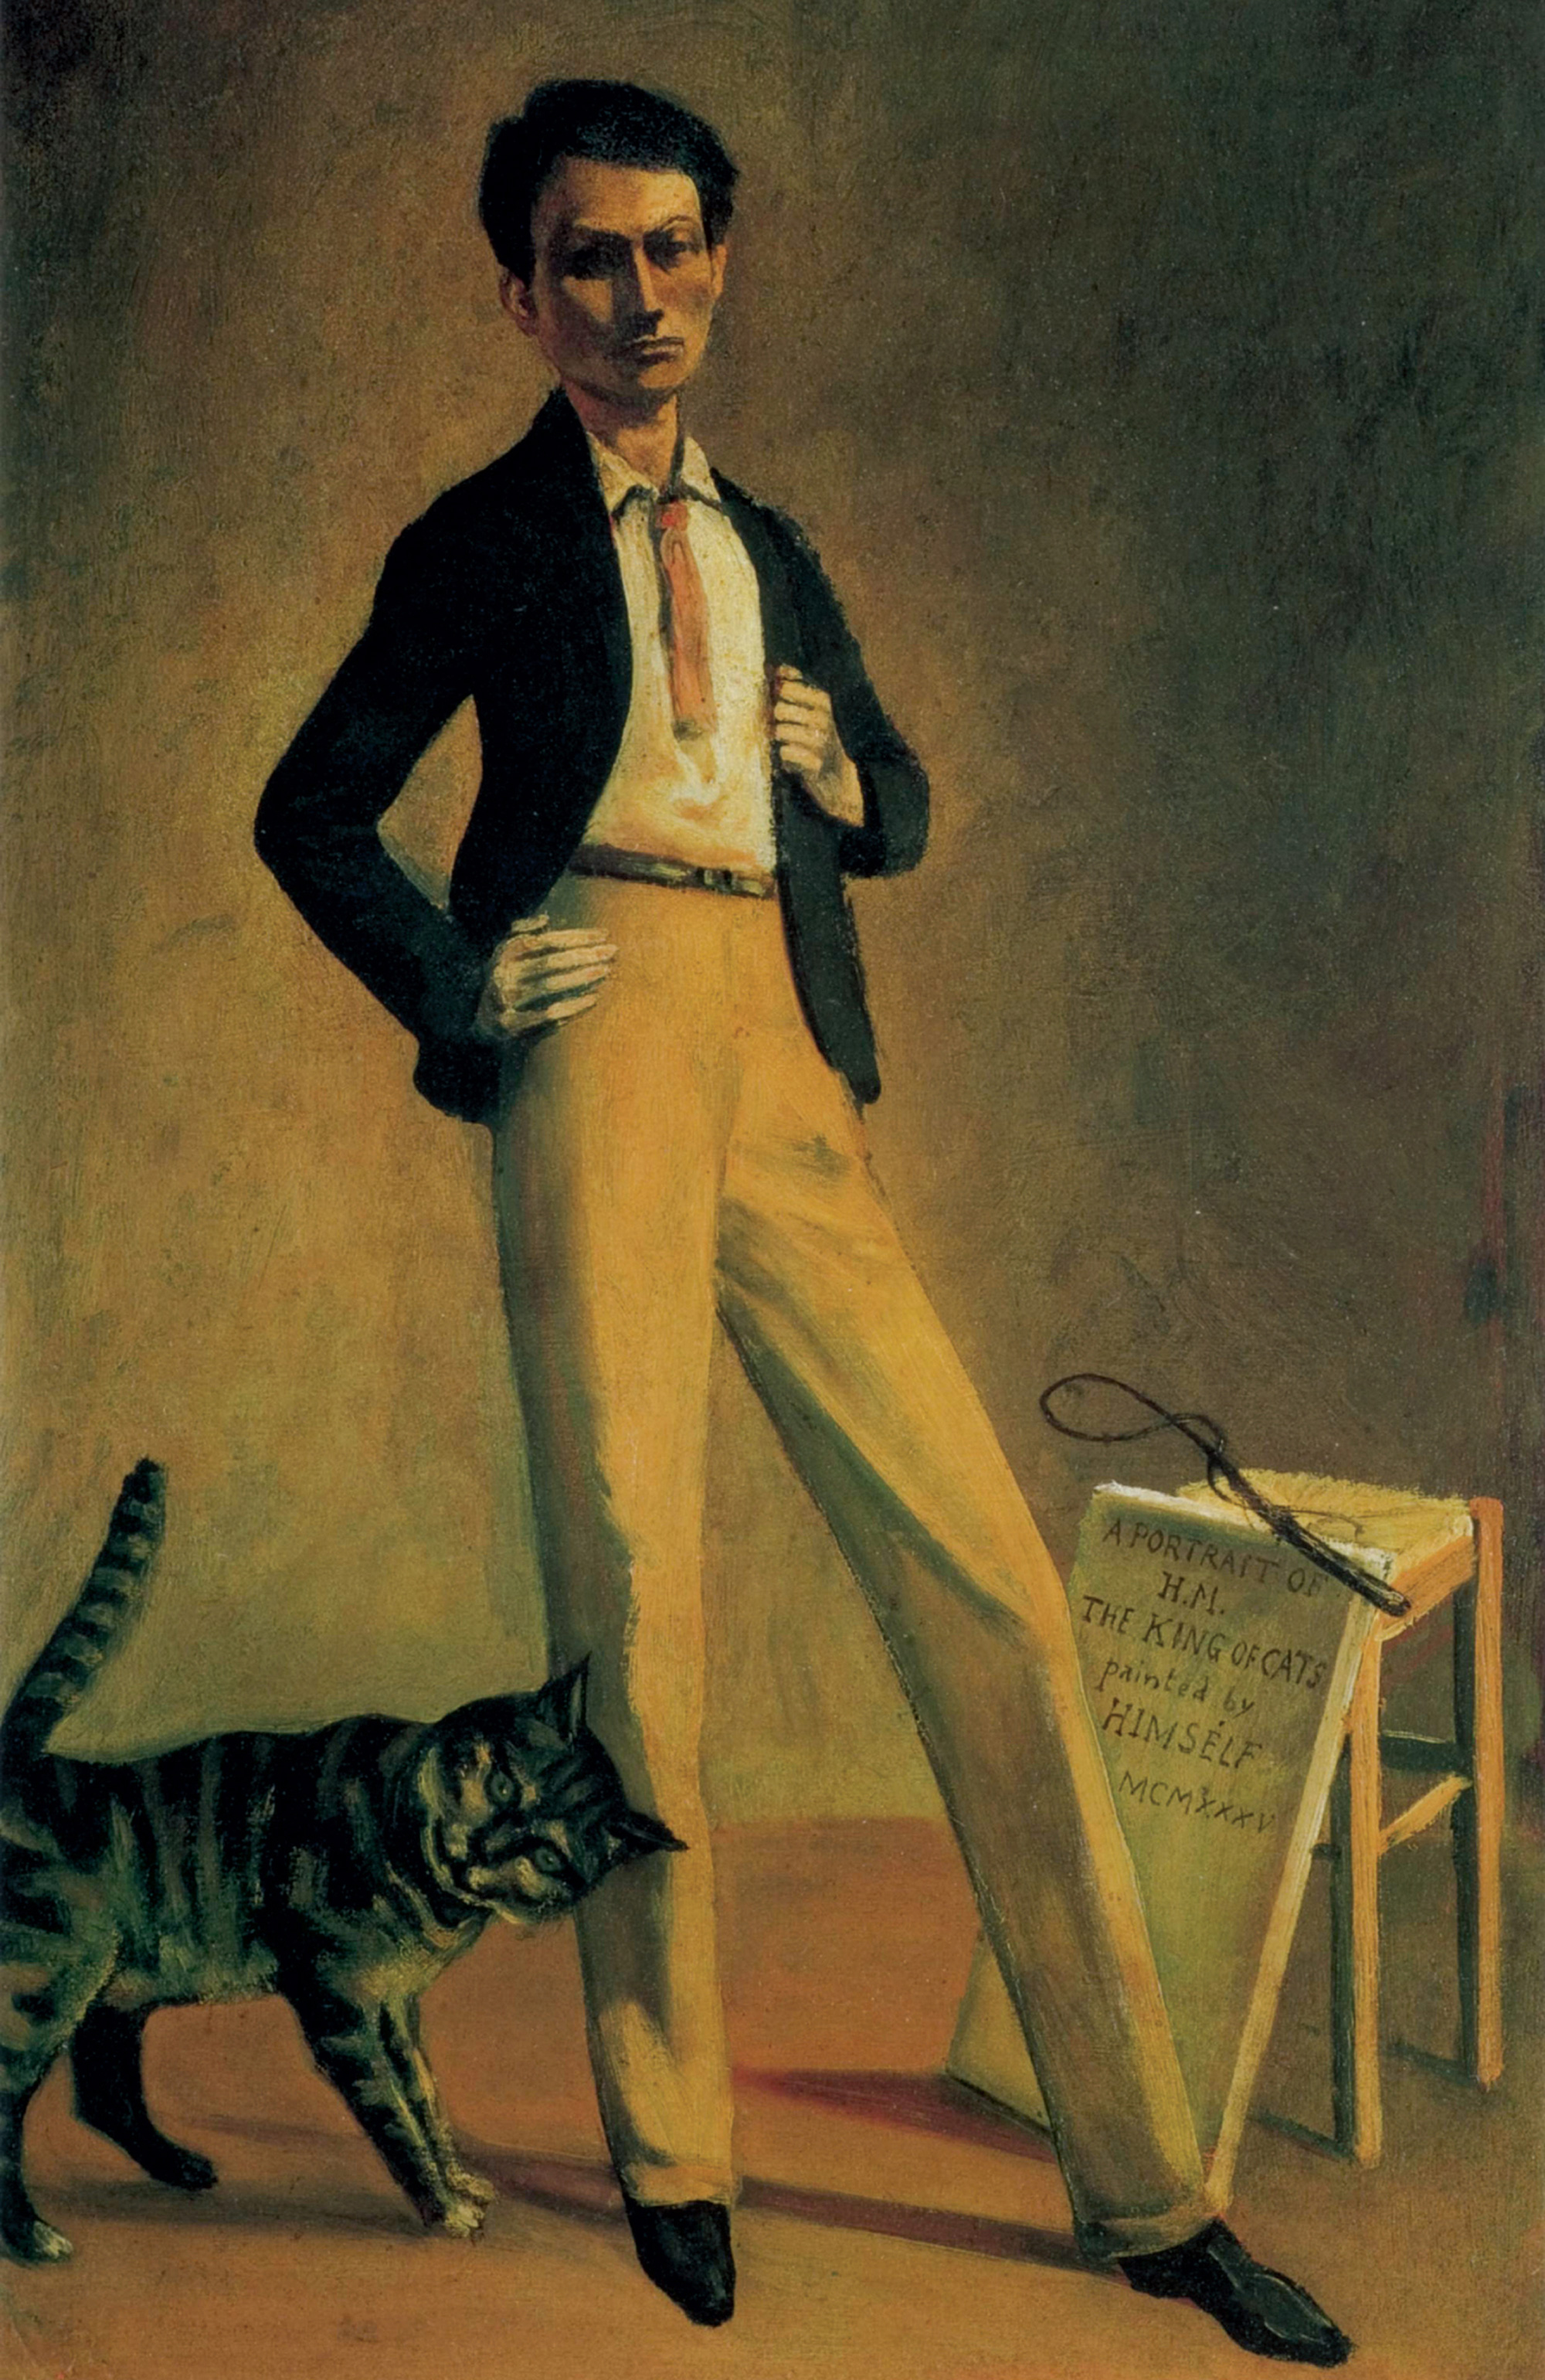 Balthus’s nineteen thirty-five painting depicting the artist and a cat, titled “The King of the Cats.”